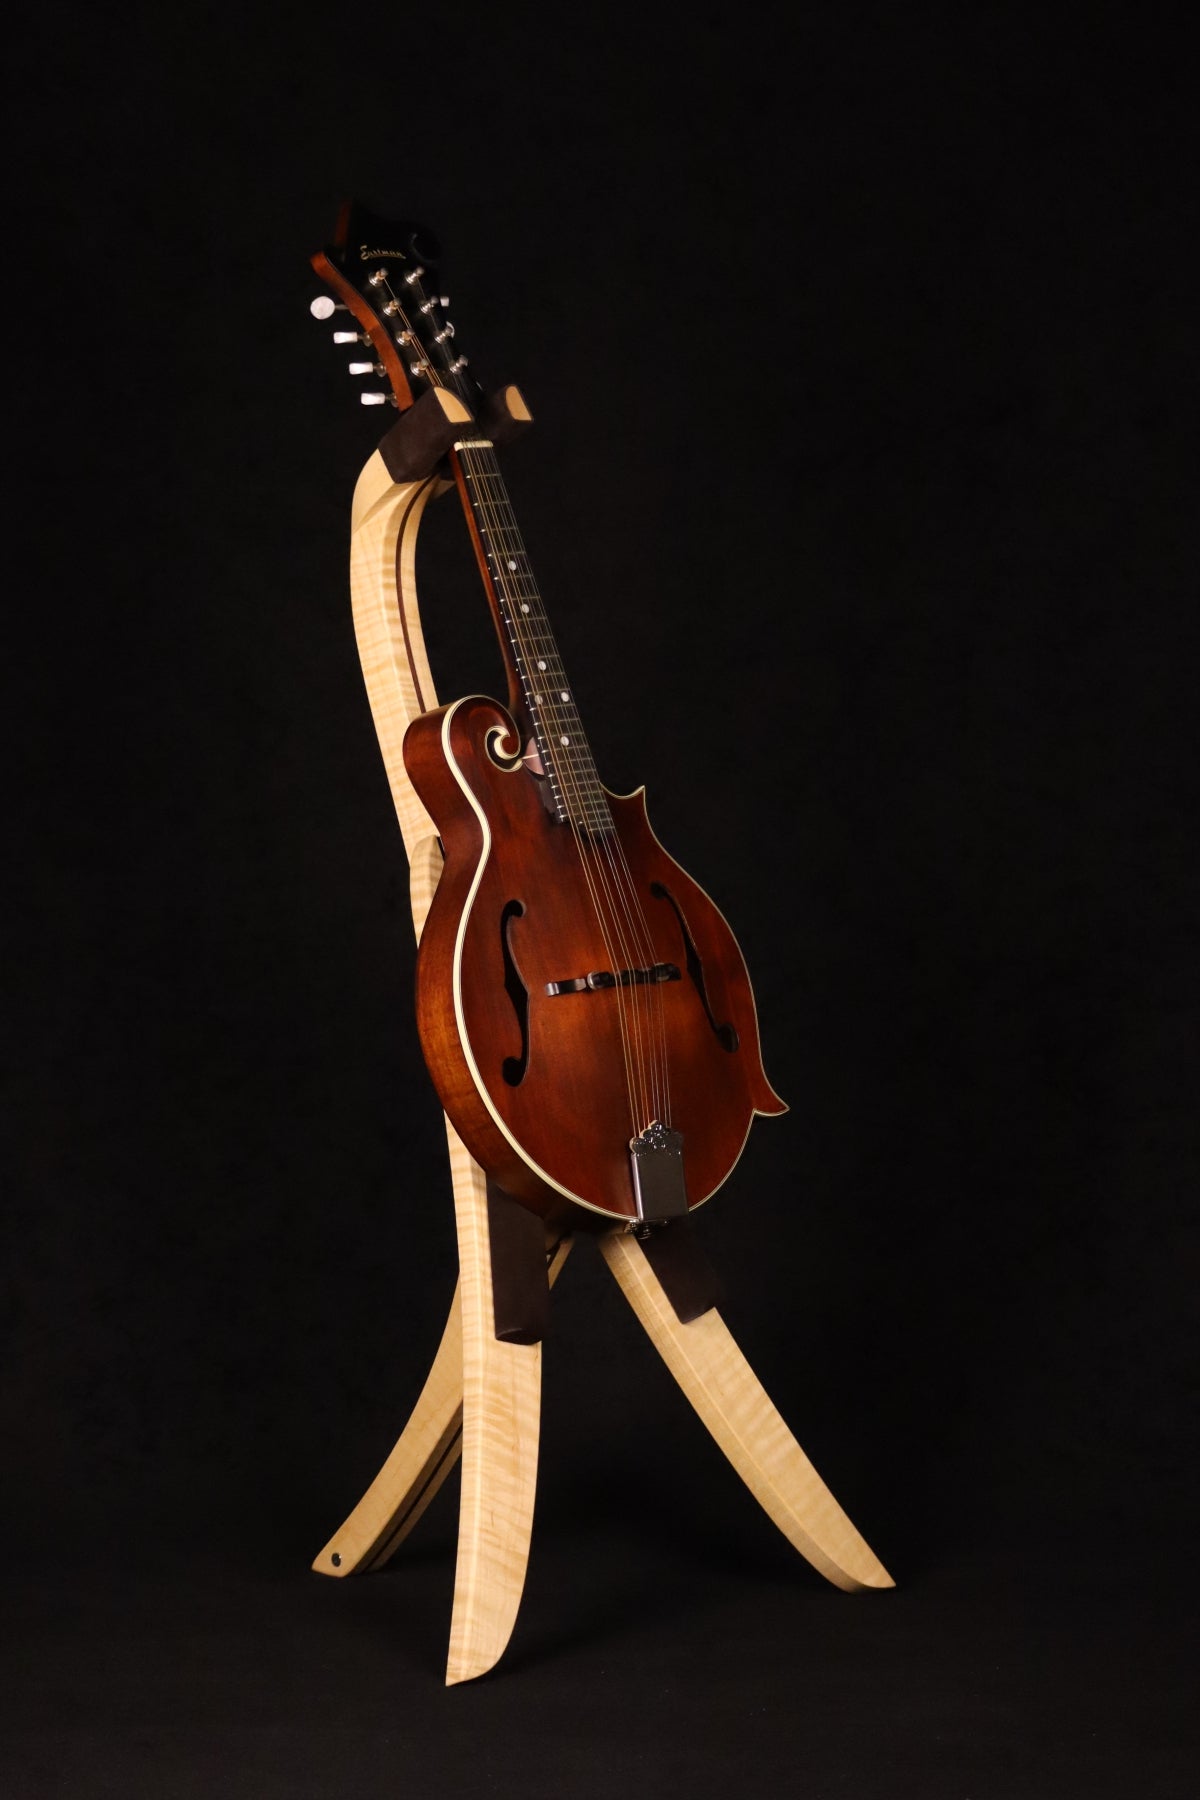 Folding curly maple and walnut wood mandolin floor stand full front image with Eastman mandolin